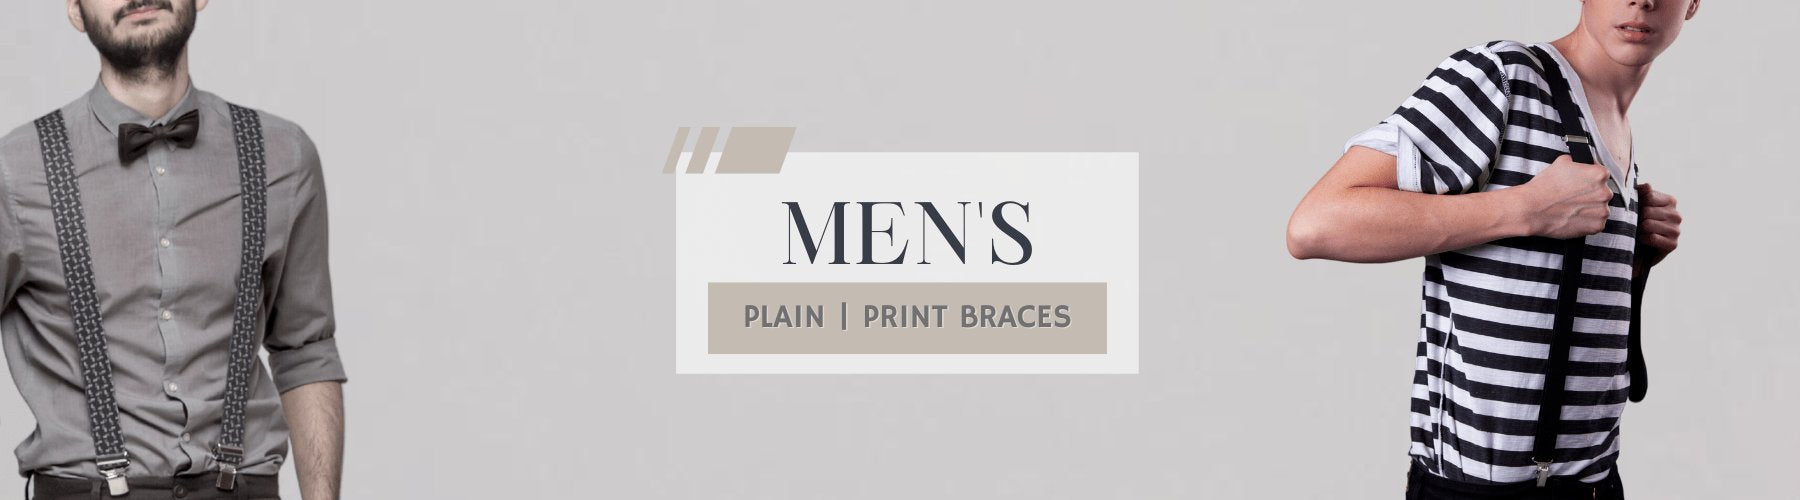 What Size Trouser Braces Do I Need Braces size guide  Gents Shop